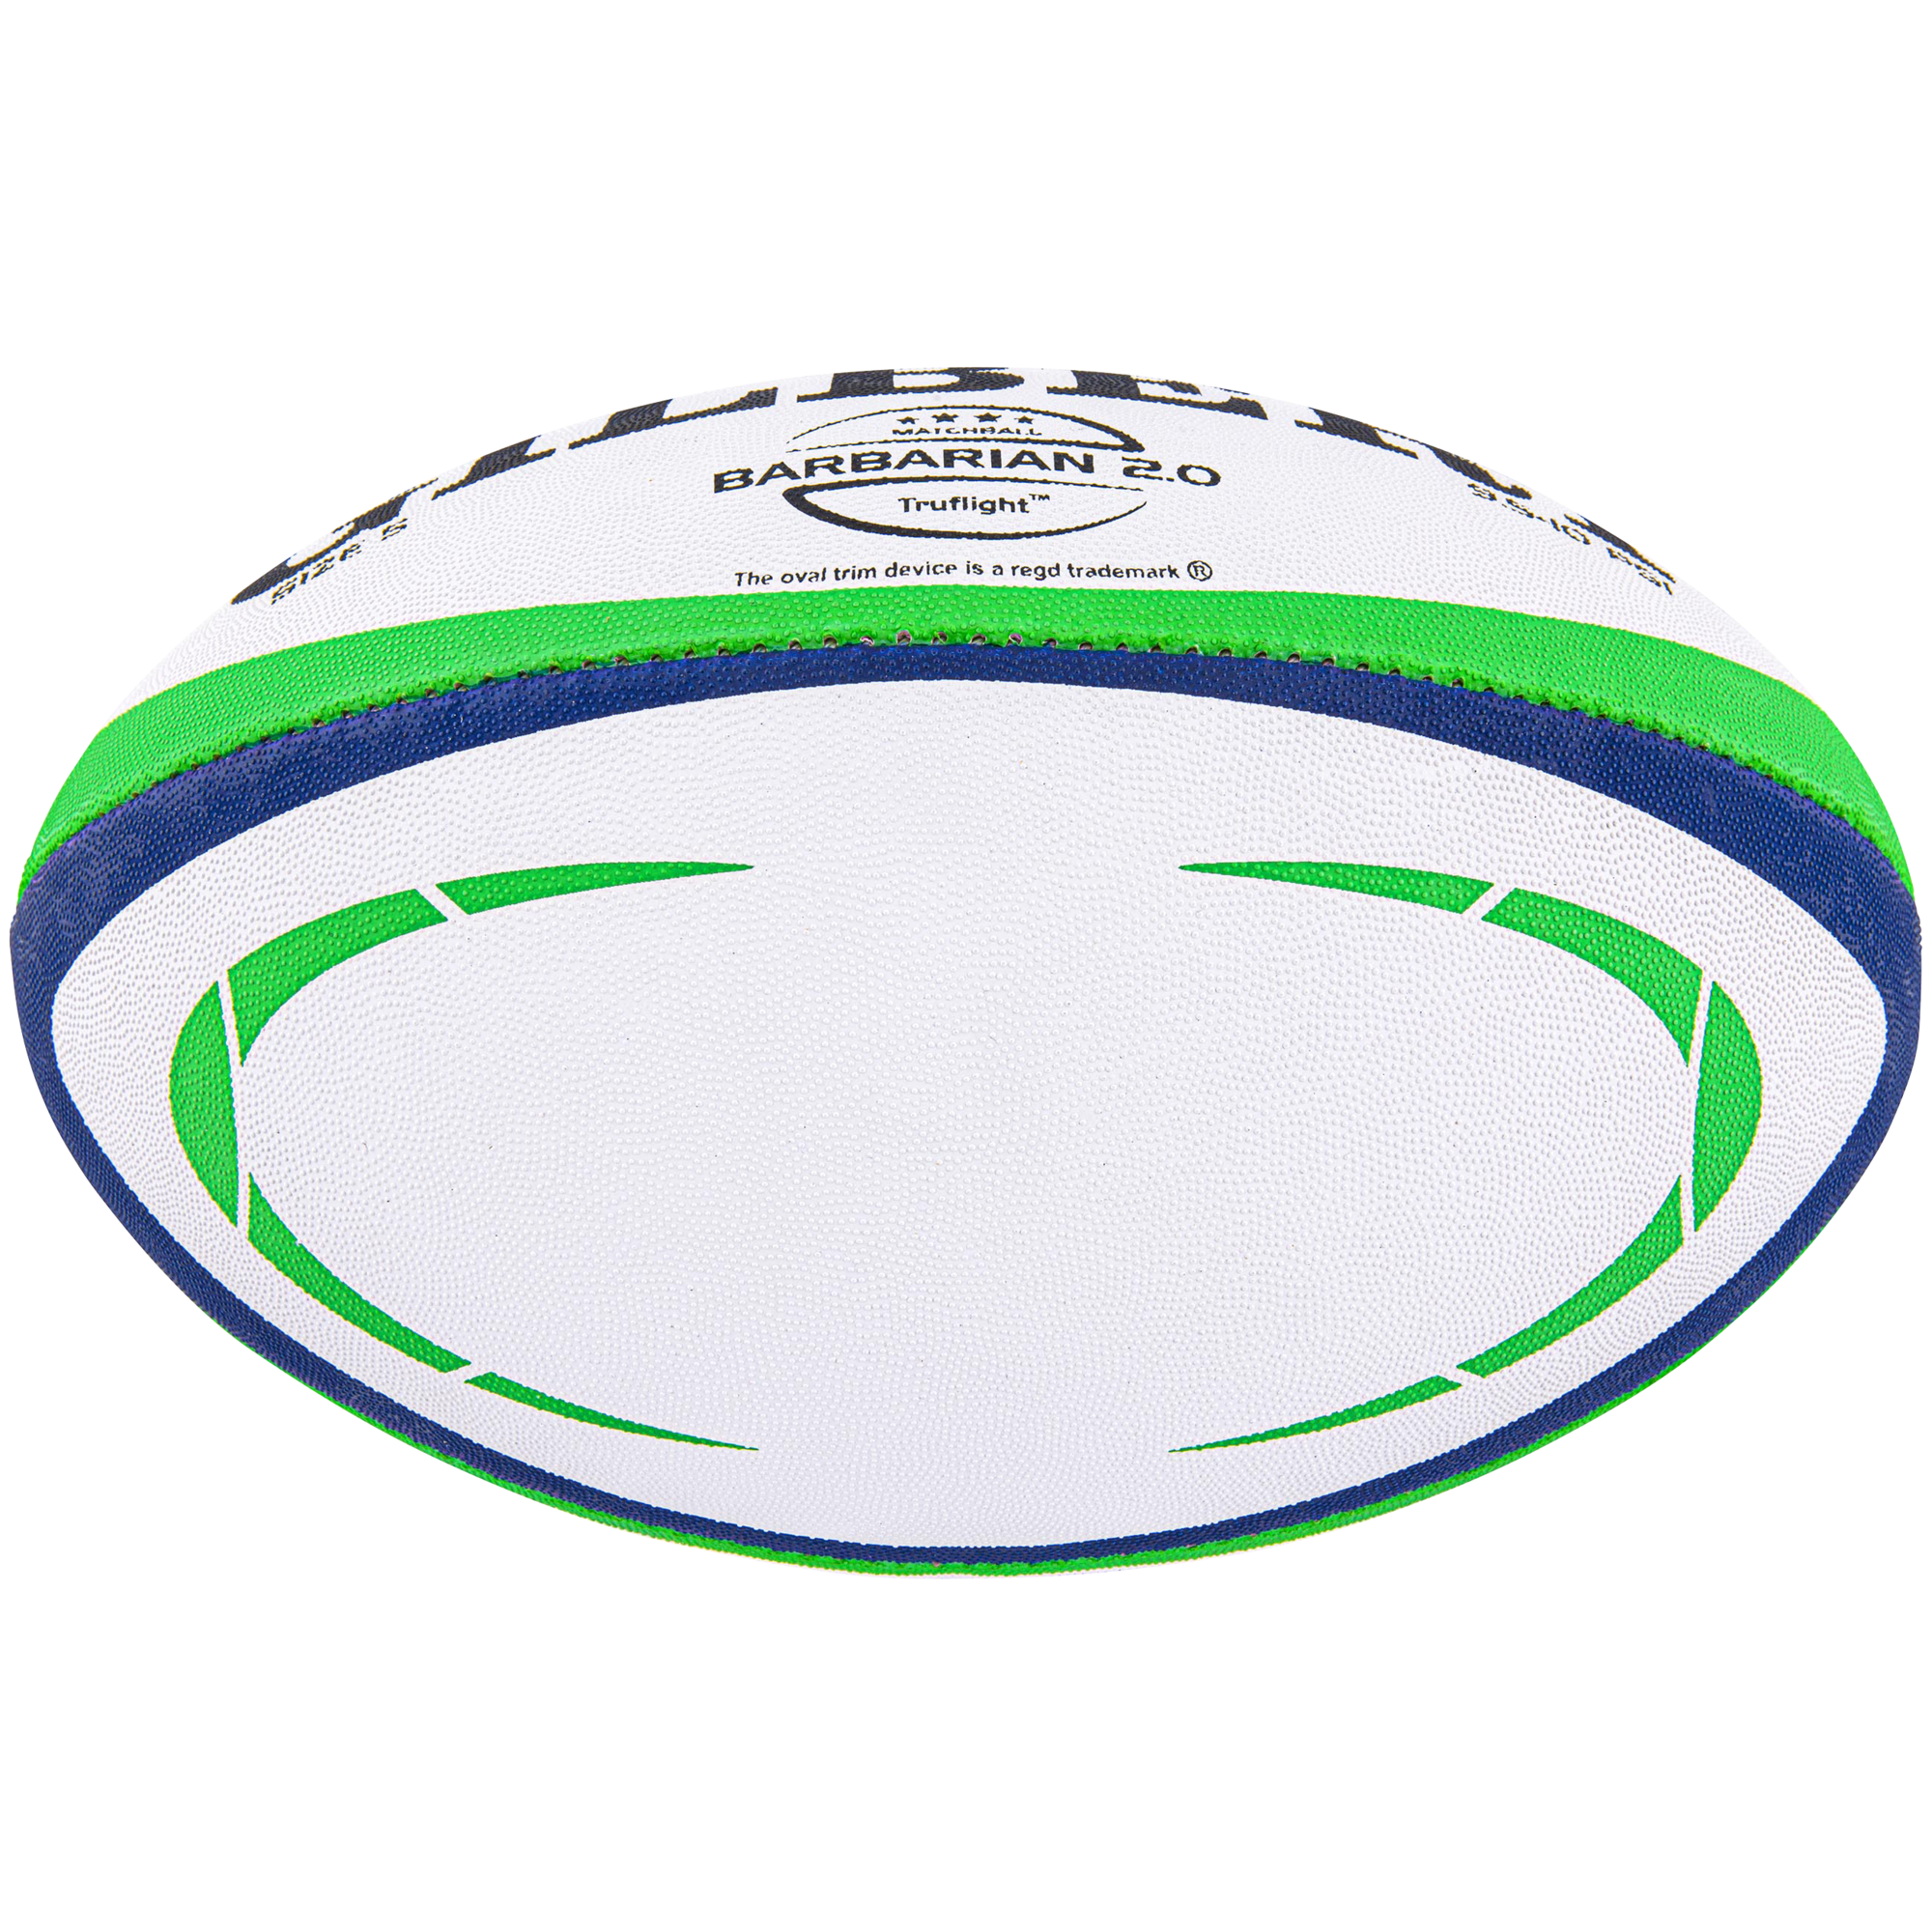 Gilbert Barbarian Rugby Match Ball Free Aus Delivery 